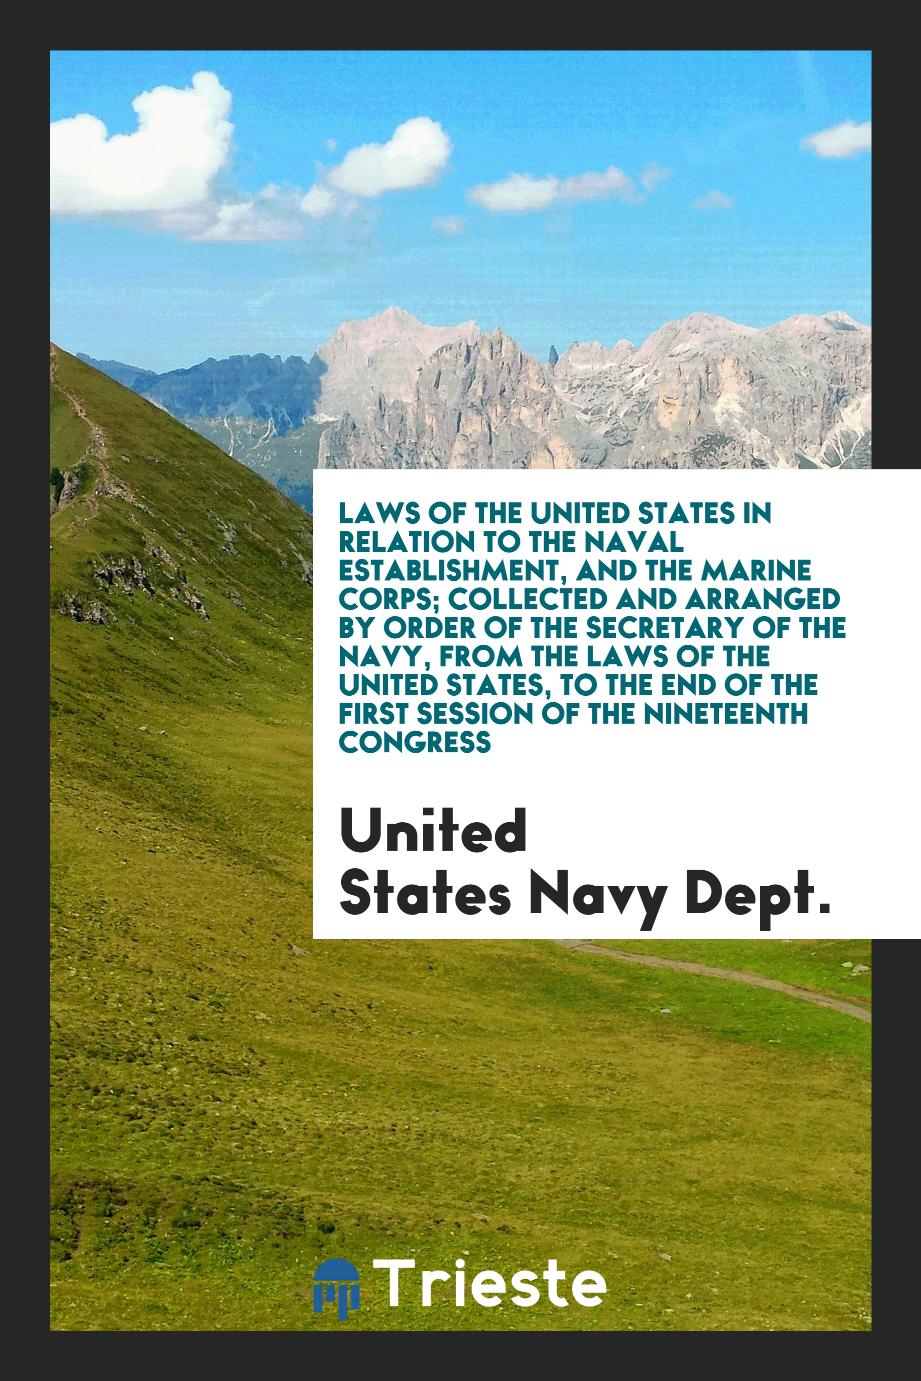 Laws of the United States in relation to the naval establishment, and the Marine corps; collected and arranged by order of the Secretary of the Navy, from the laws of the United States, to the end of the first session of the Nineteenth Congress